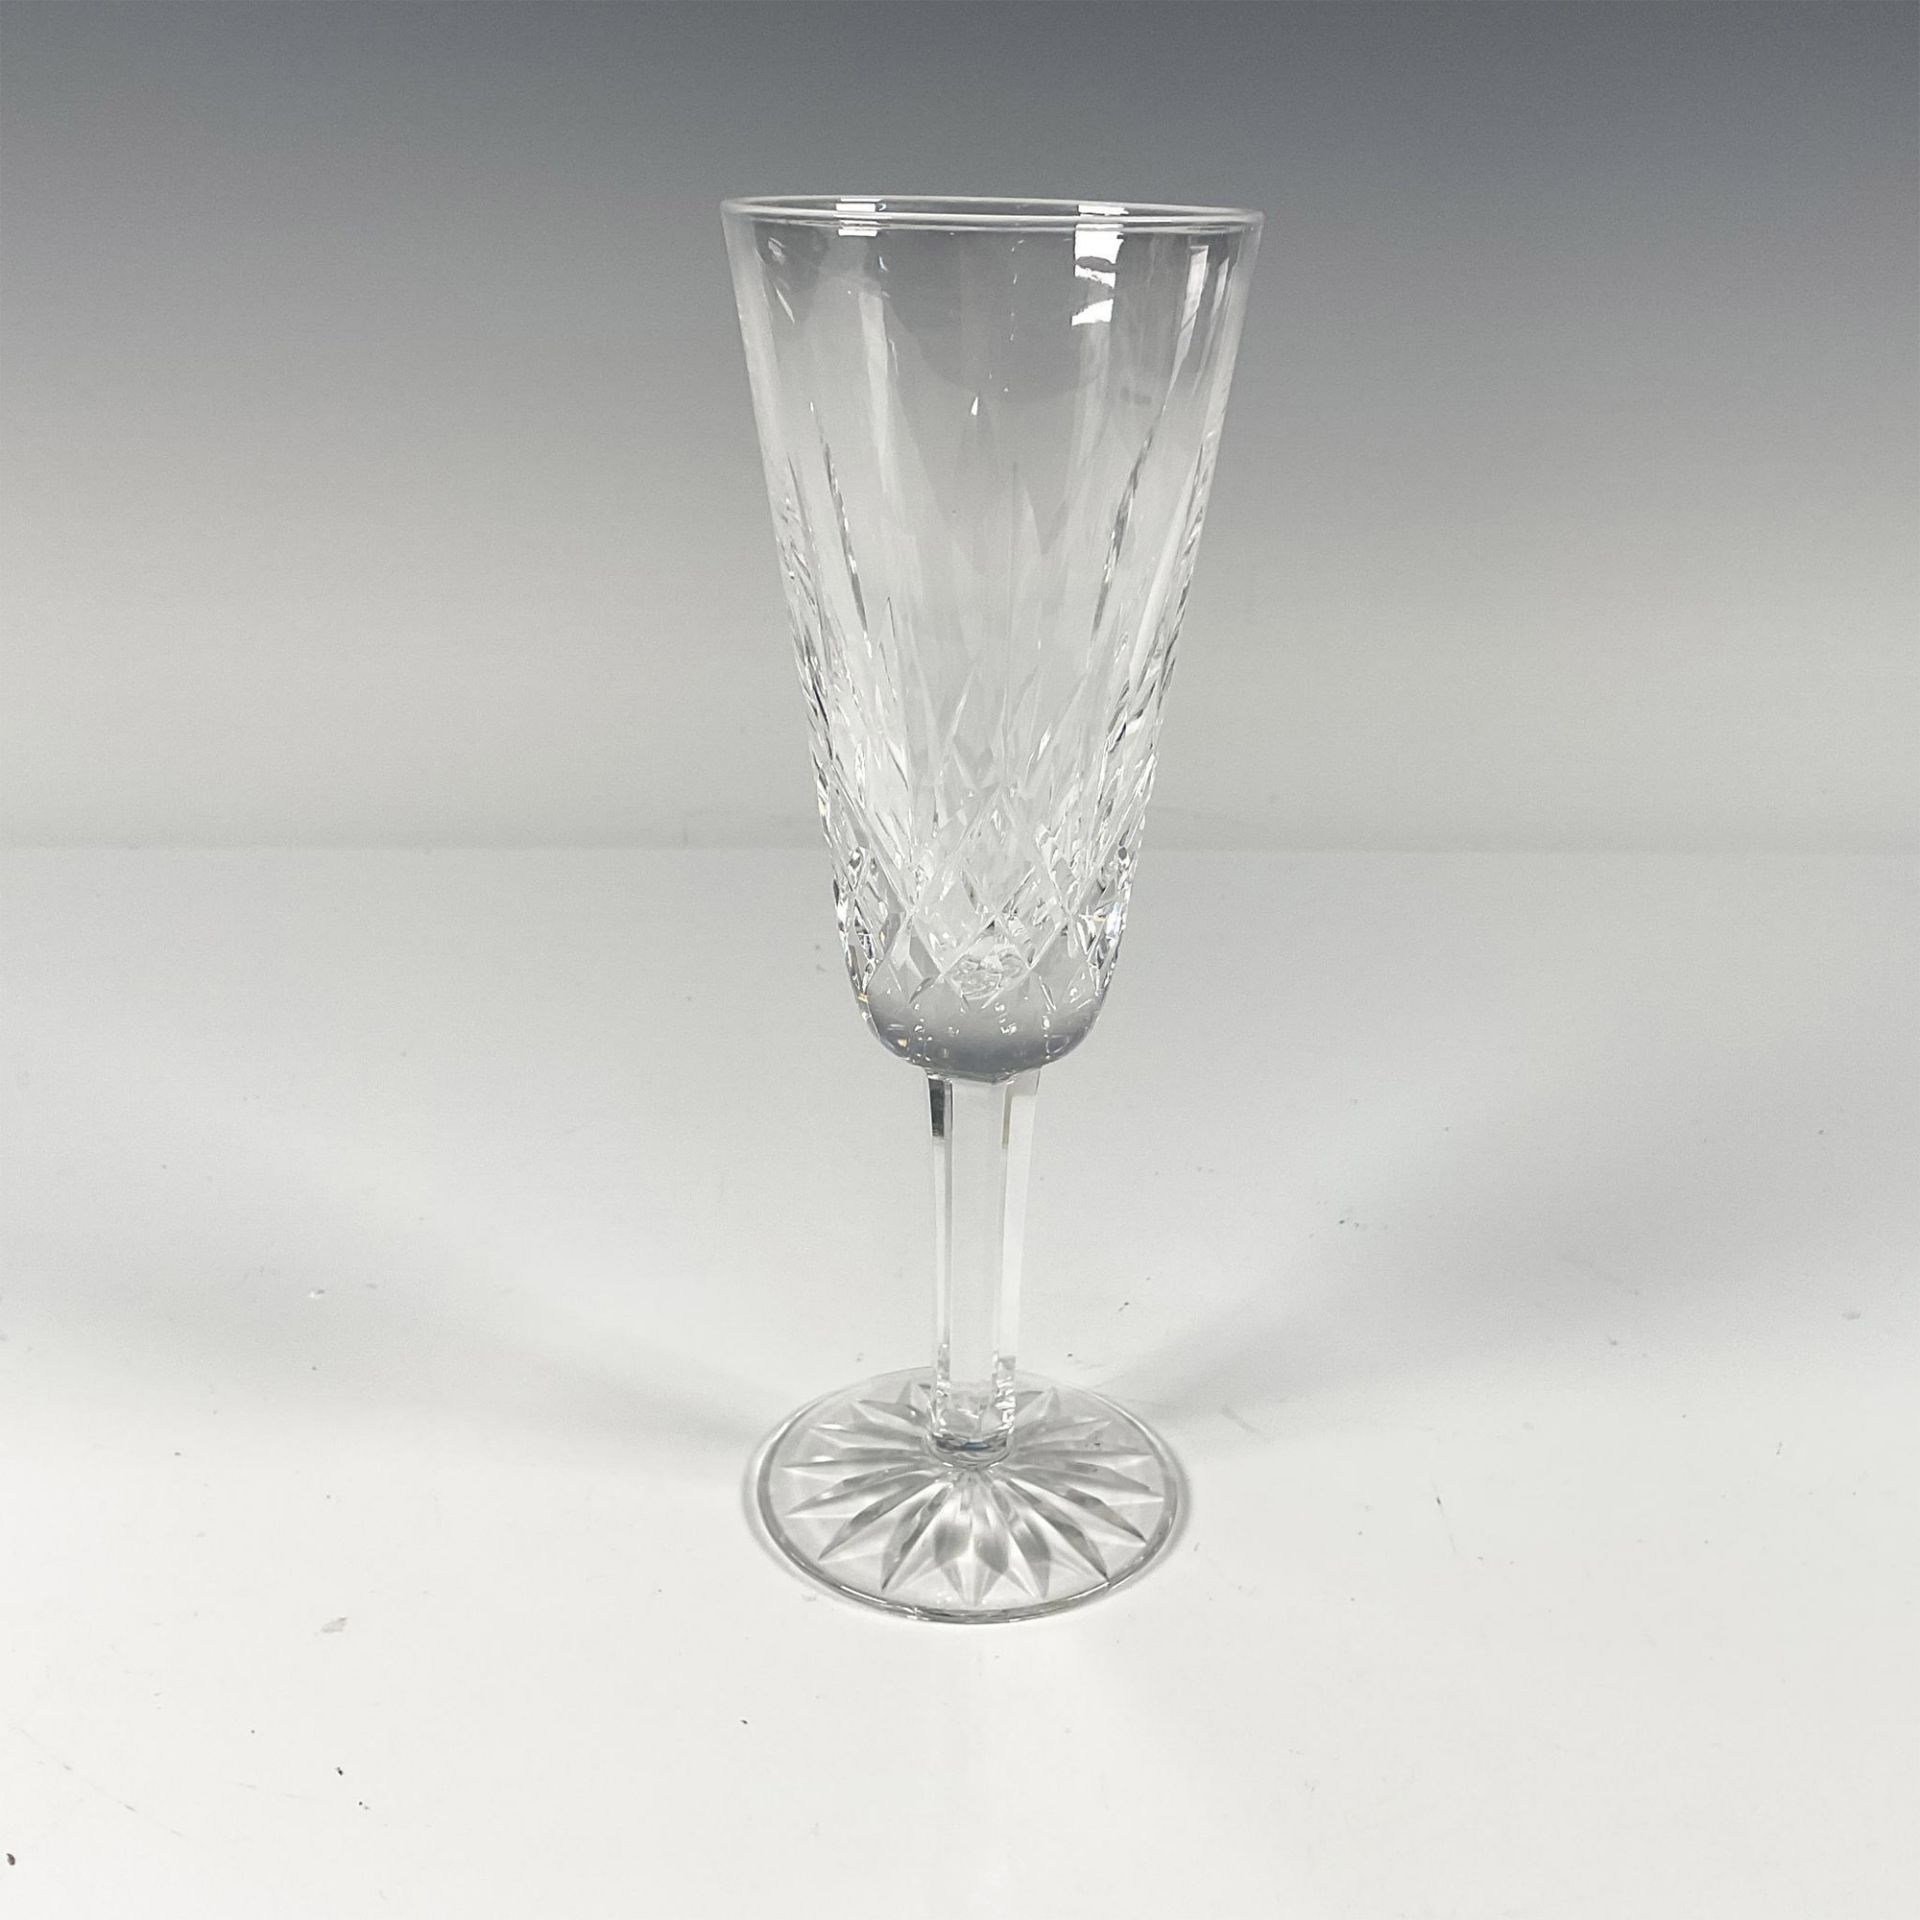 12pc Waterford Champagne Glasses, Lismore - Image 2 of 3